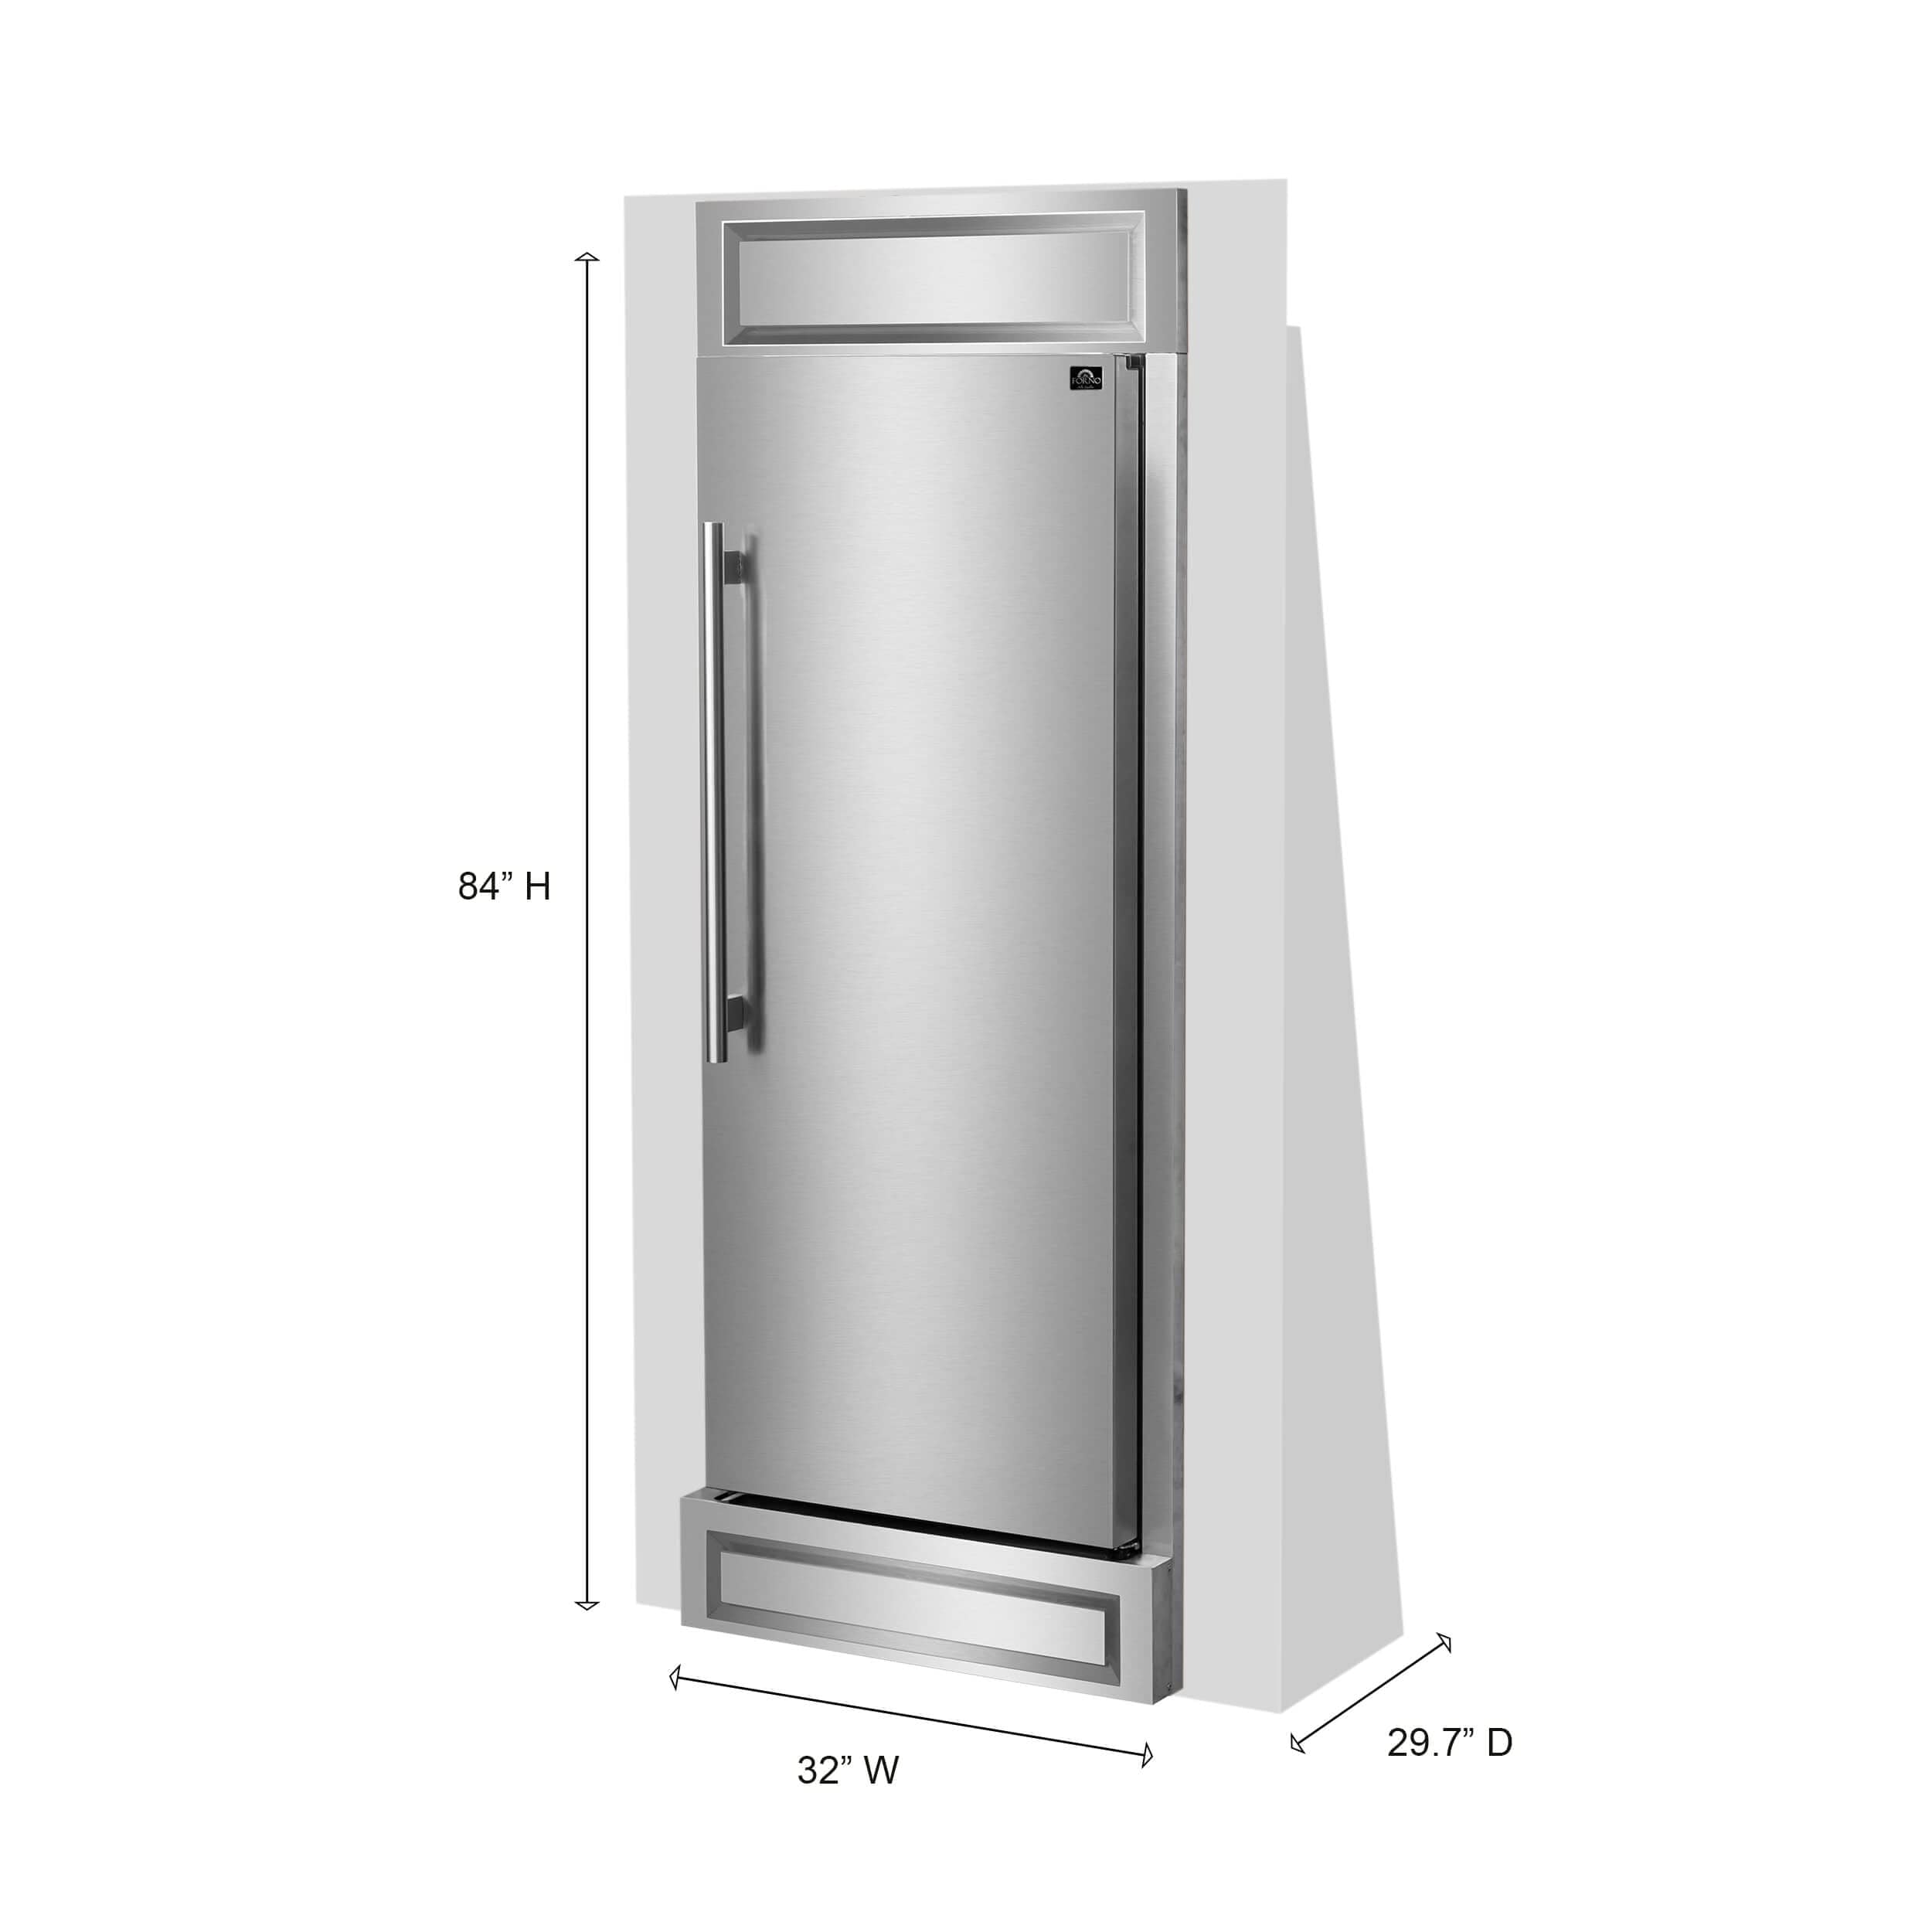 Forno Maderno 32" Right Hinge Built-In Refrigerator Freezer FFFFD1722-32RS Refrigerators FFFFD1722-32RS Luxury Appliances Direct